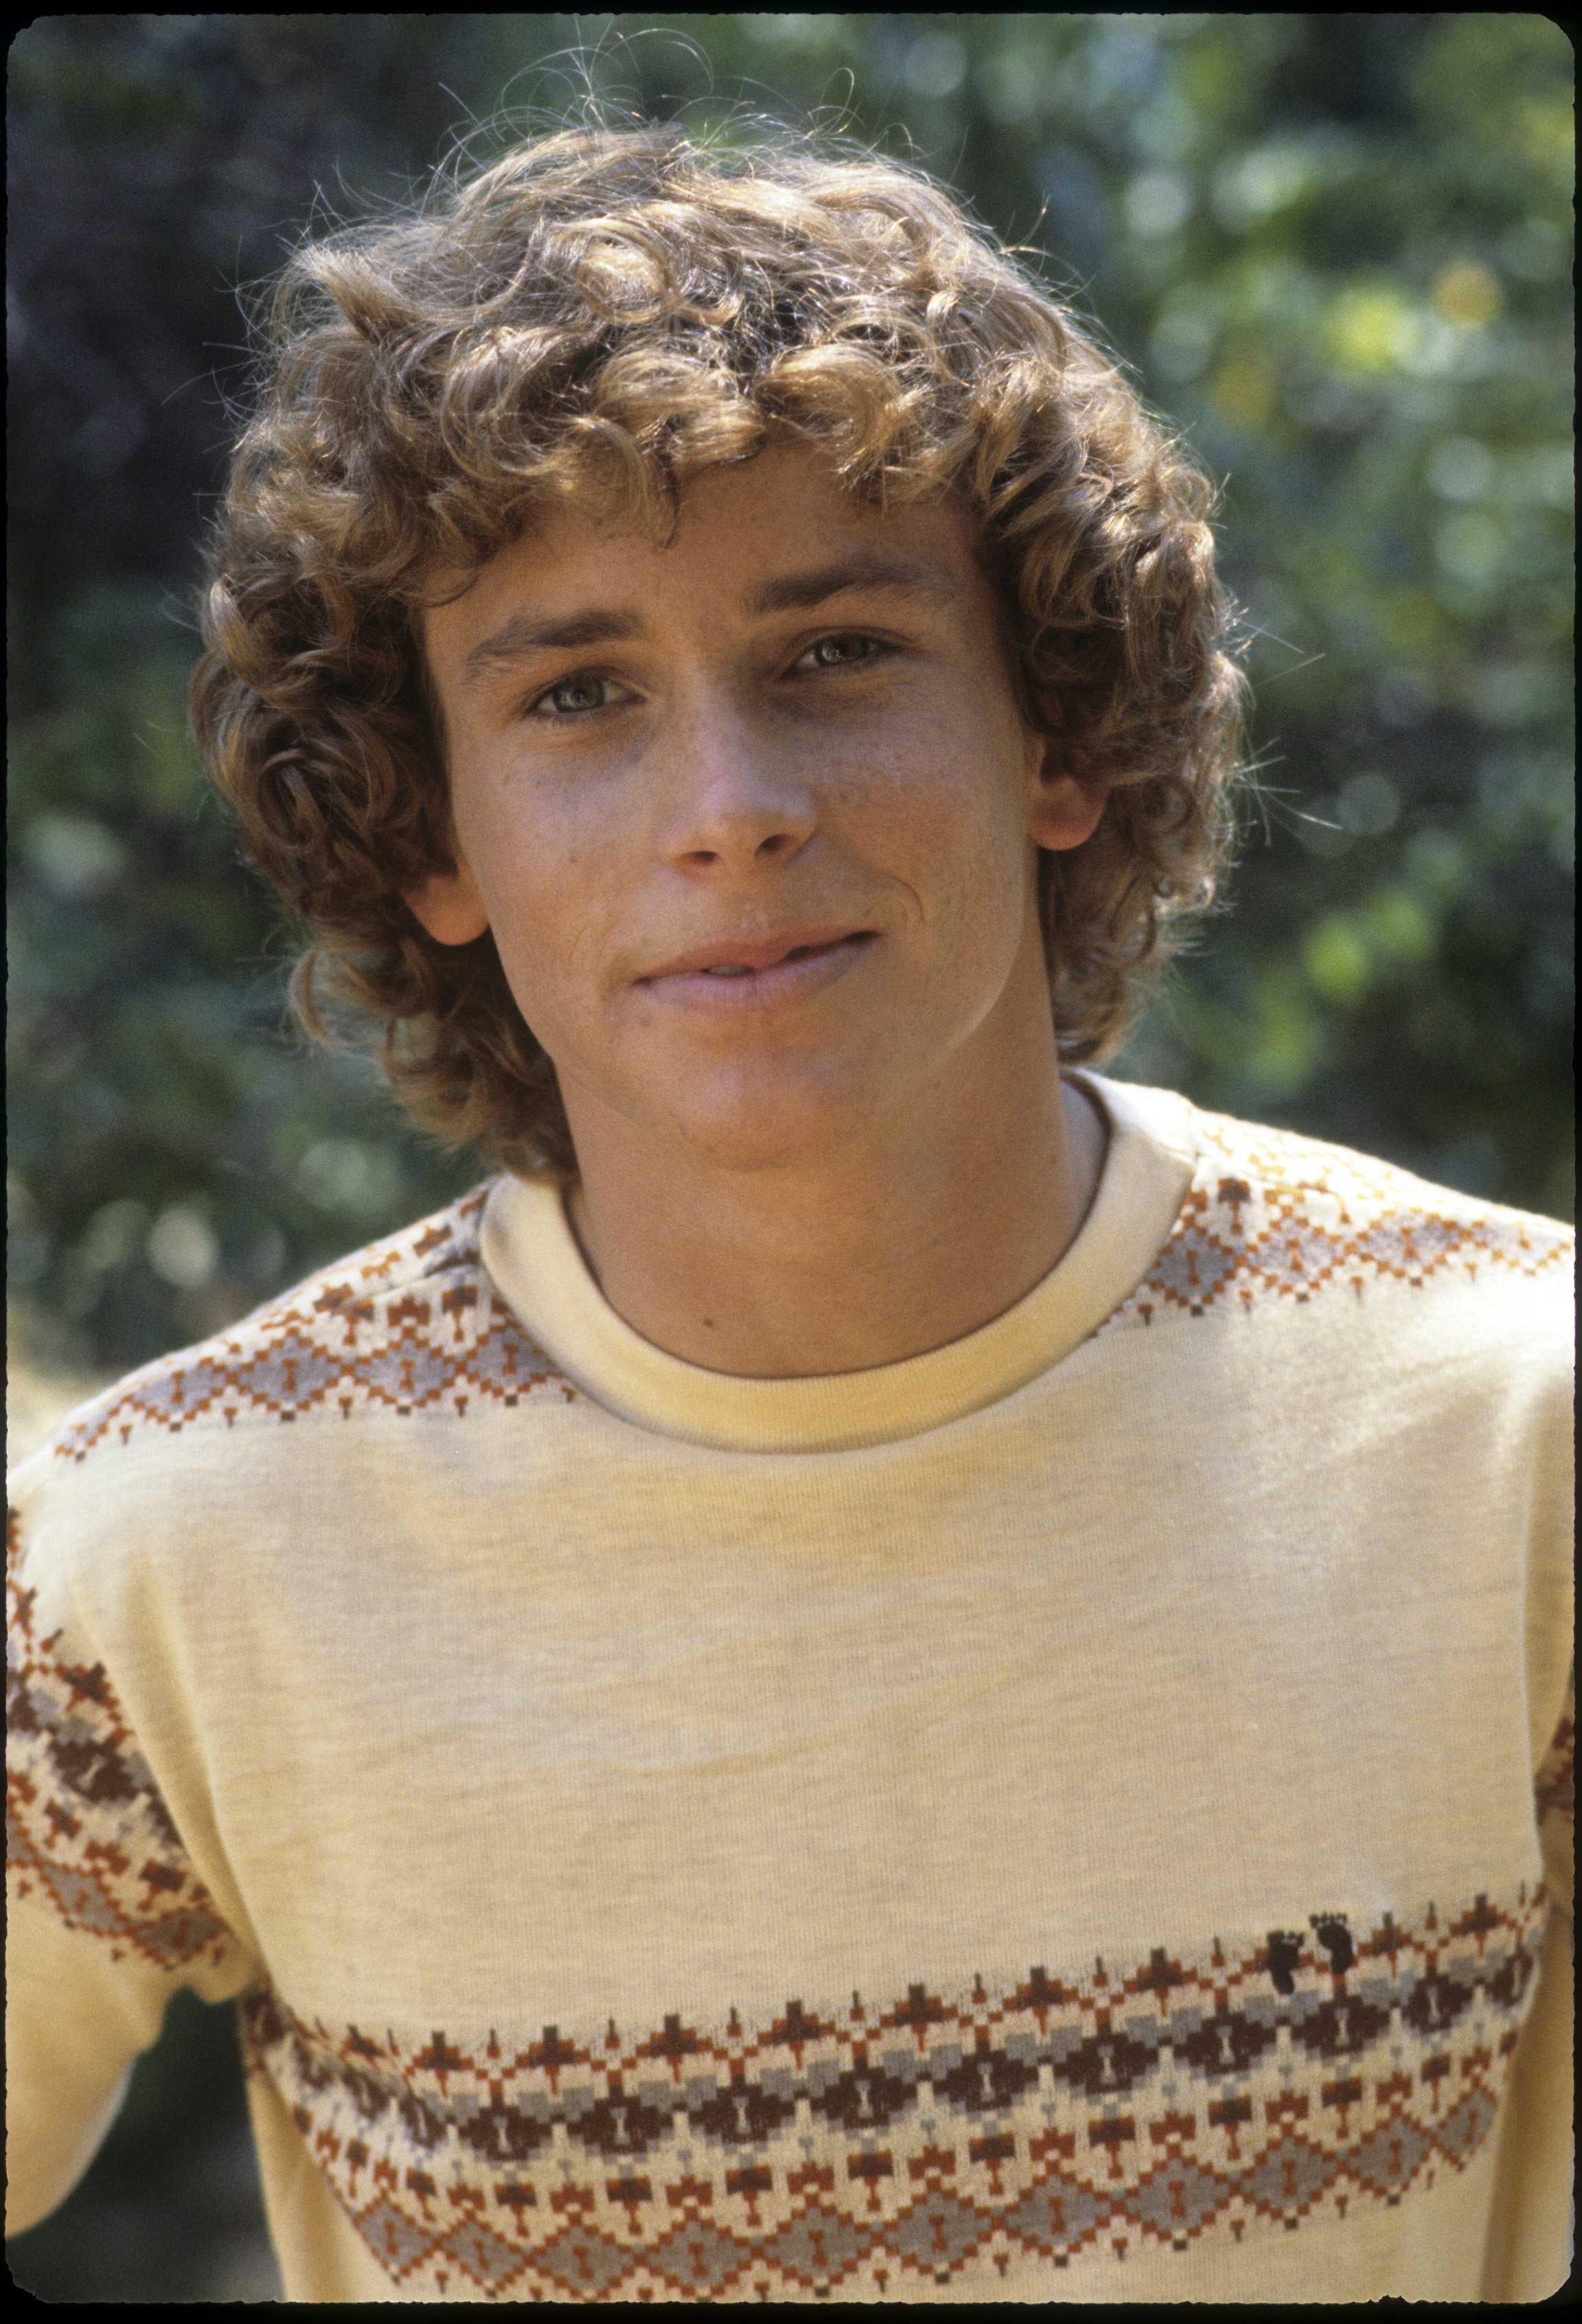 Willie Aames. FAMILY - "The First Time" - Airdate: September 27, 1977. | Source: Getty Images